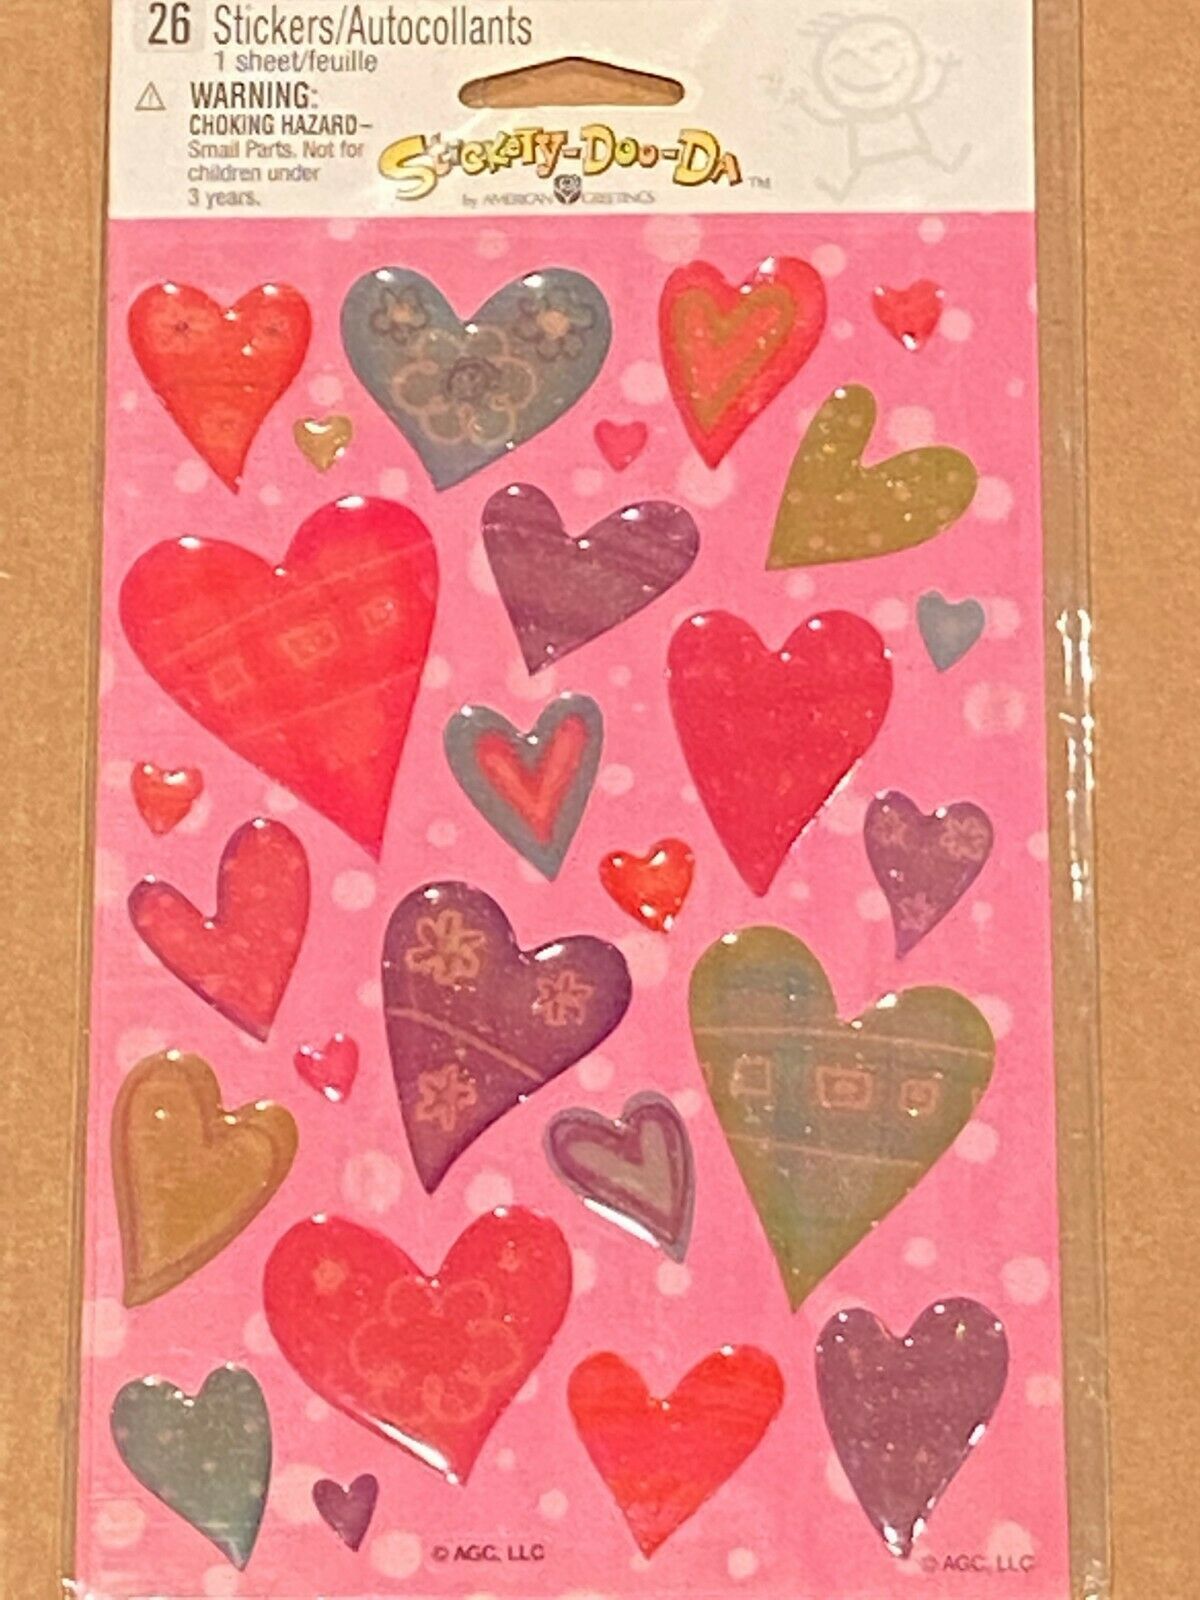 American Greetings Puffy Heart Stickers 70 Stickers*NEW/SEALED* bb1